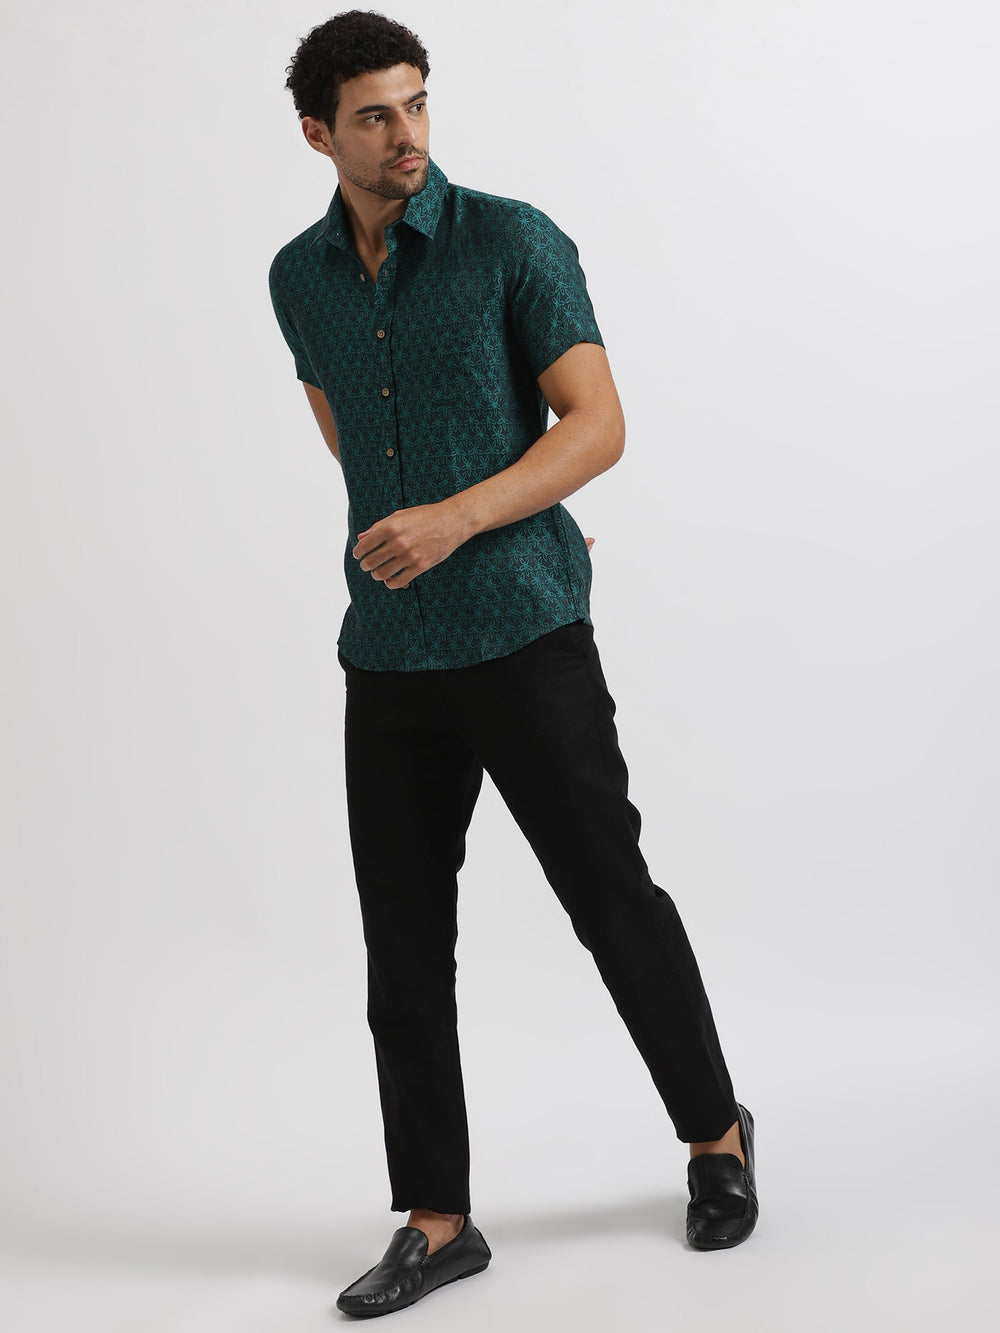 Abel - Pure Linen Floral Jacquard Half Sleeve Shirt - Peacock Green | Rescue